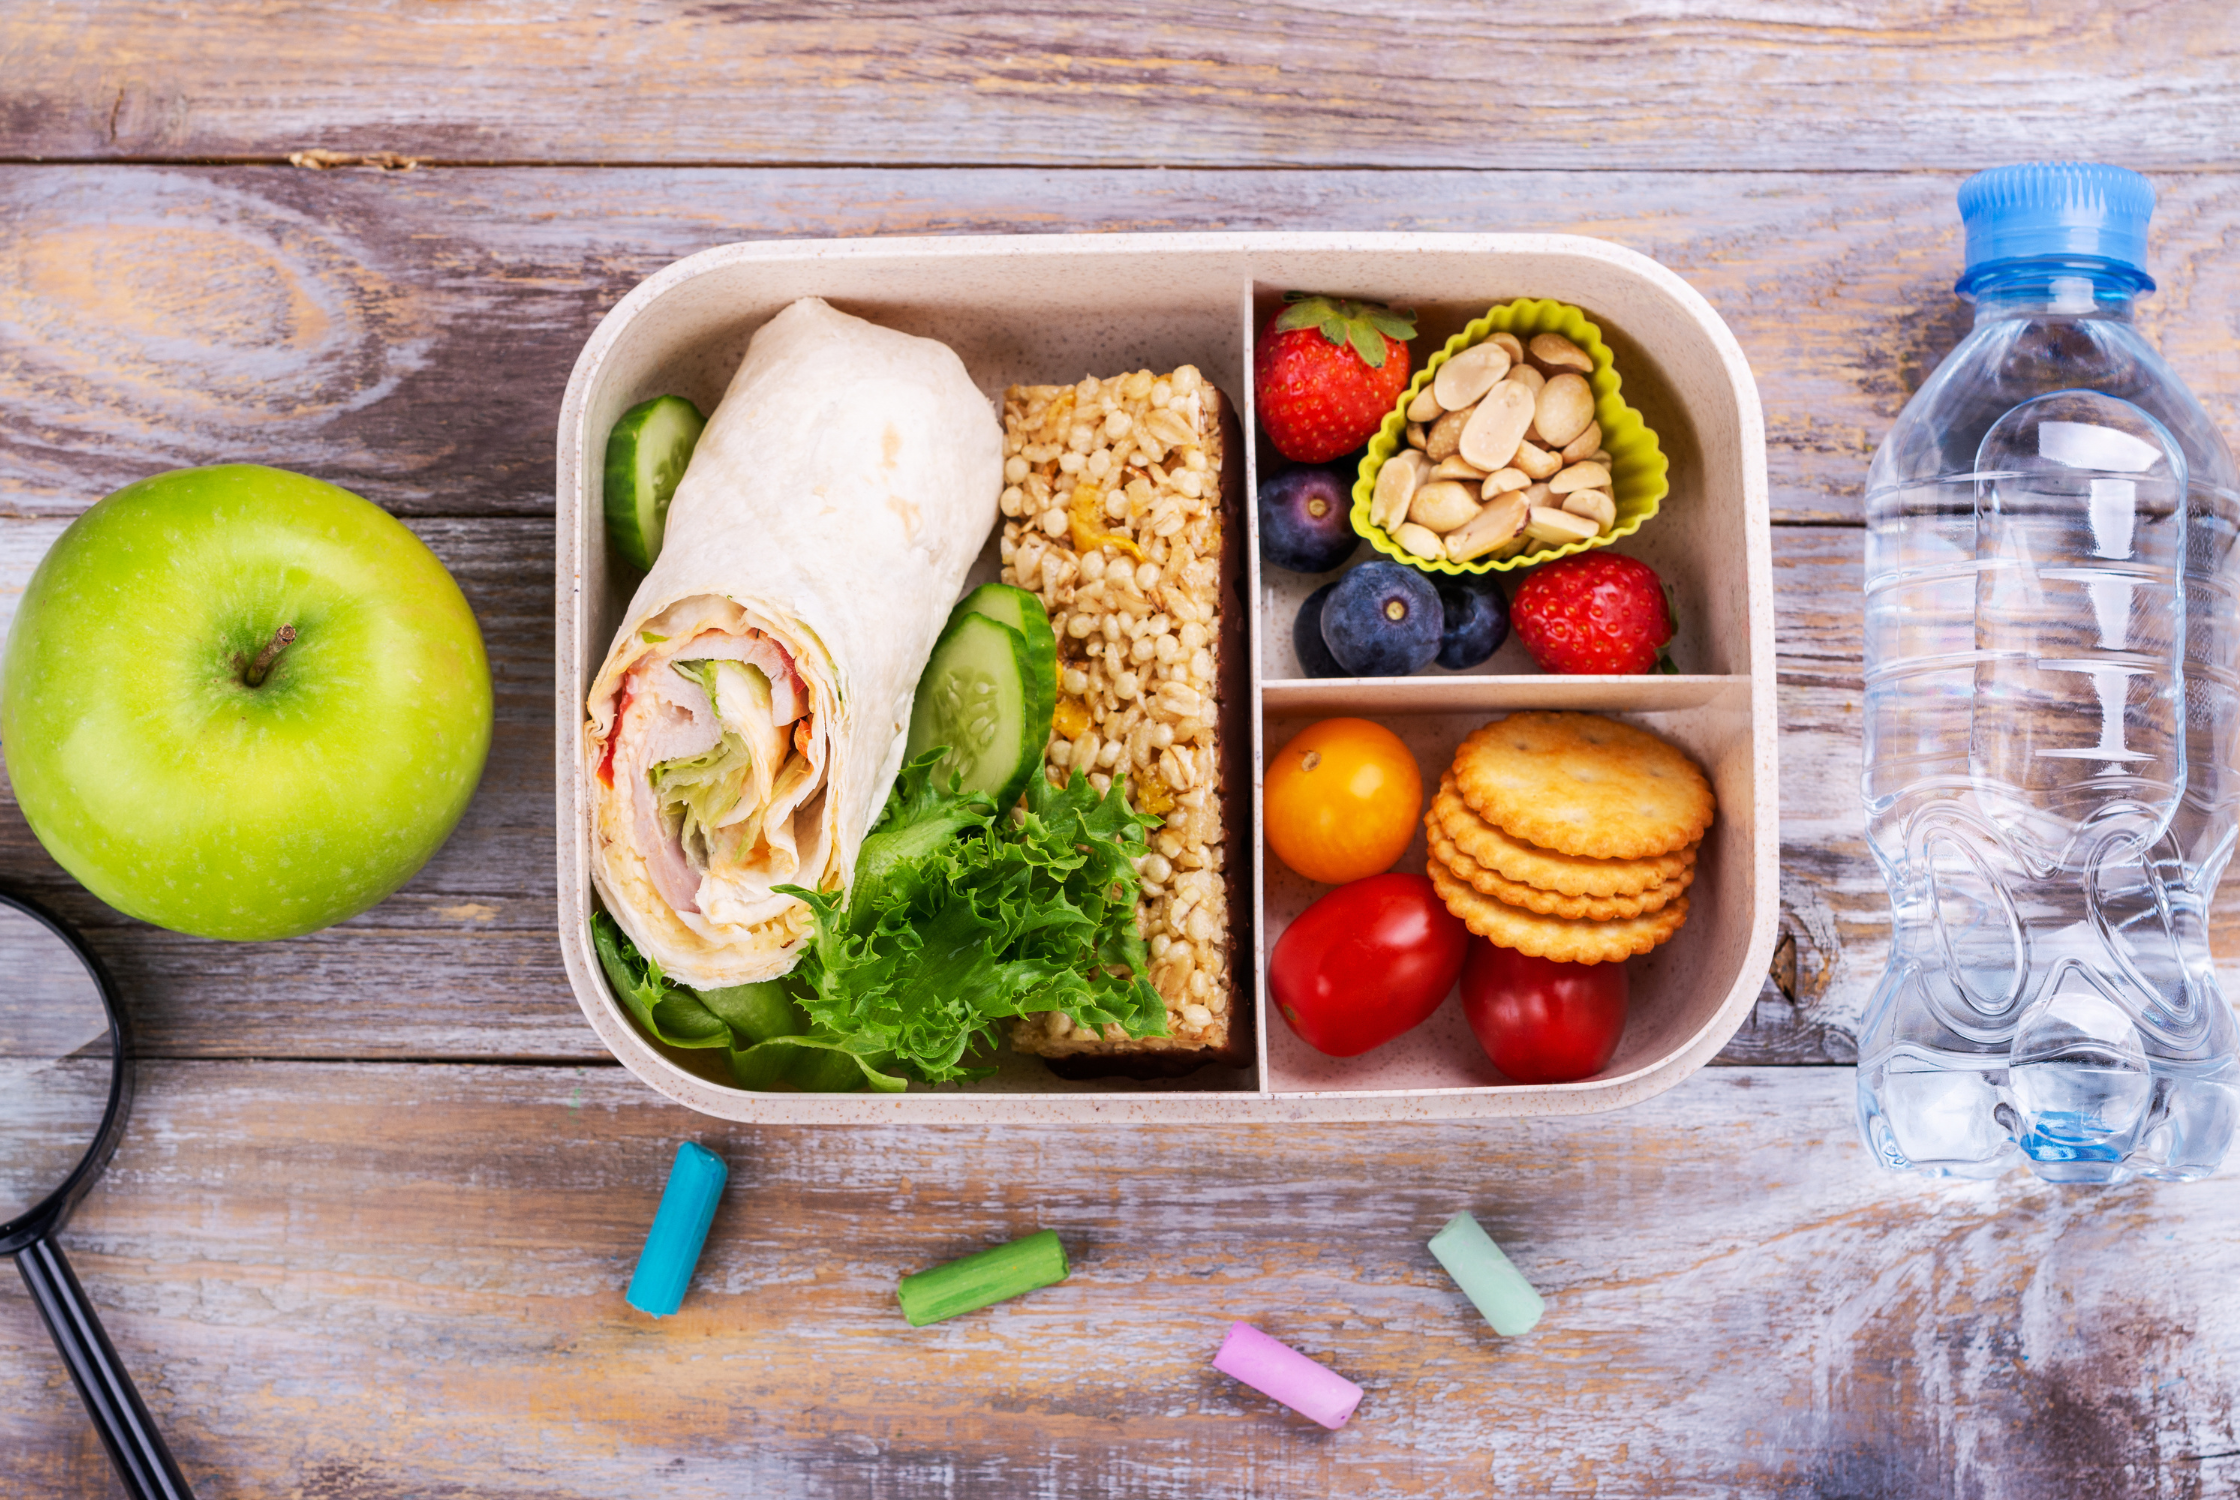 Moms are now packing insanely elaborate school lunches